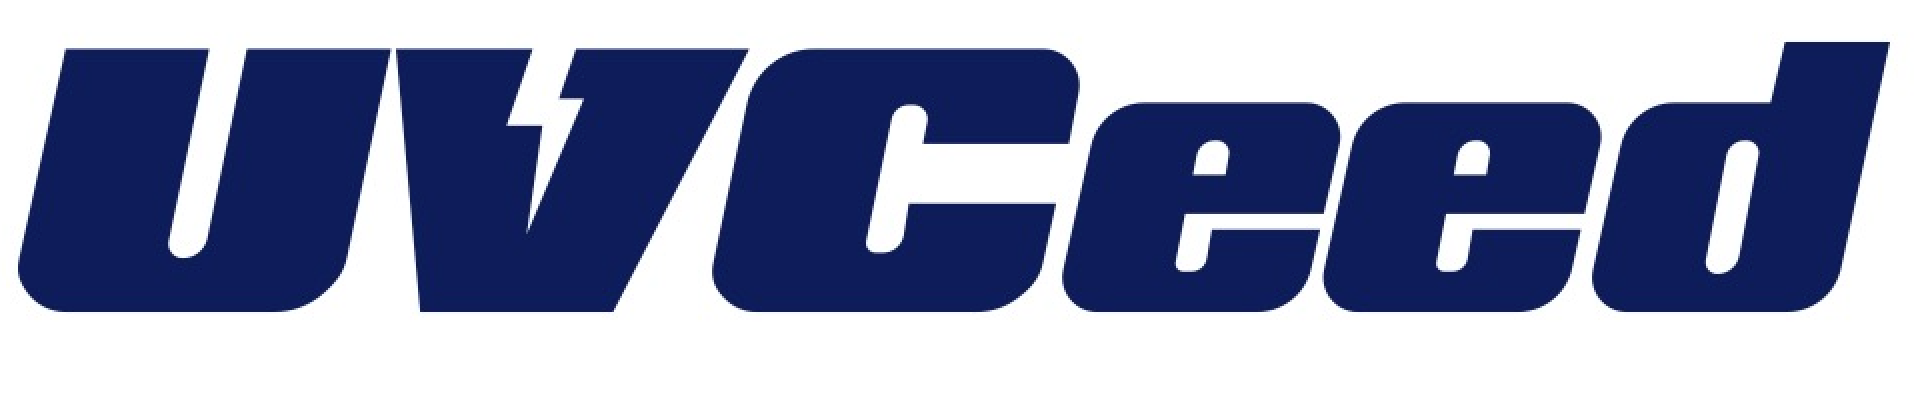 UVCEED_LOGO.png